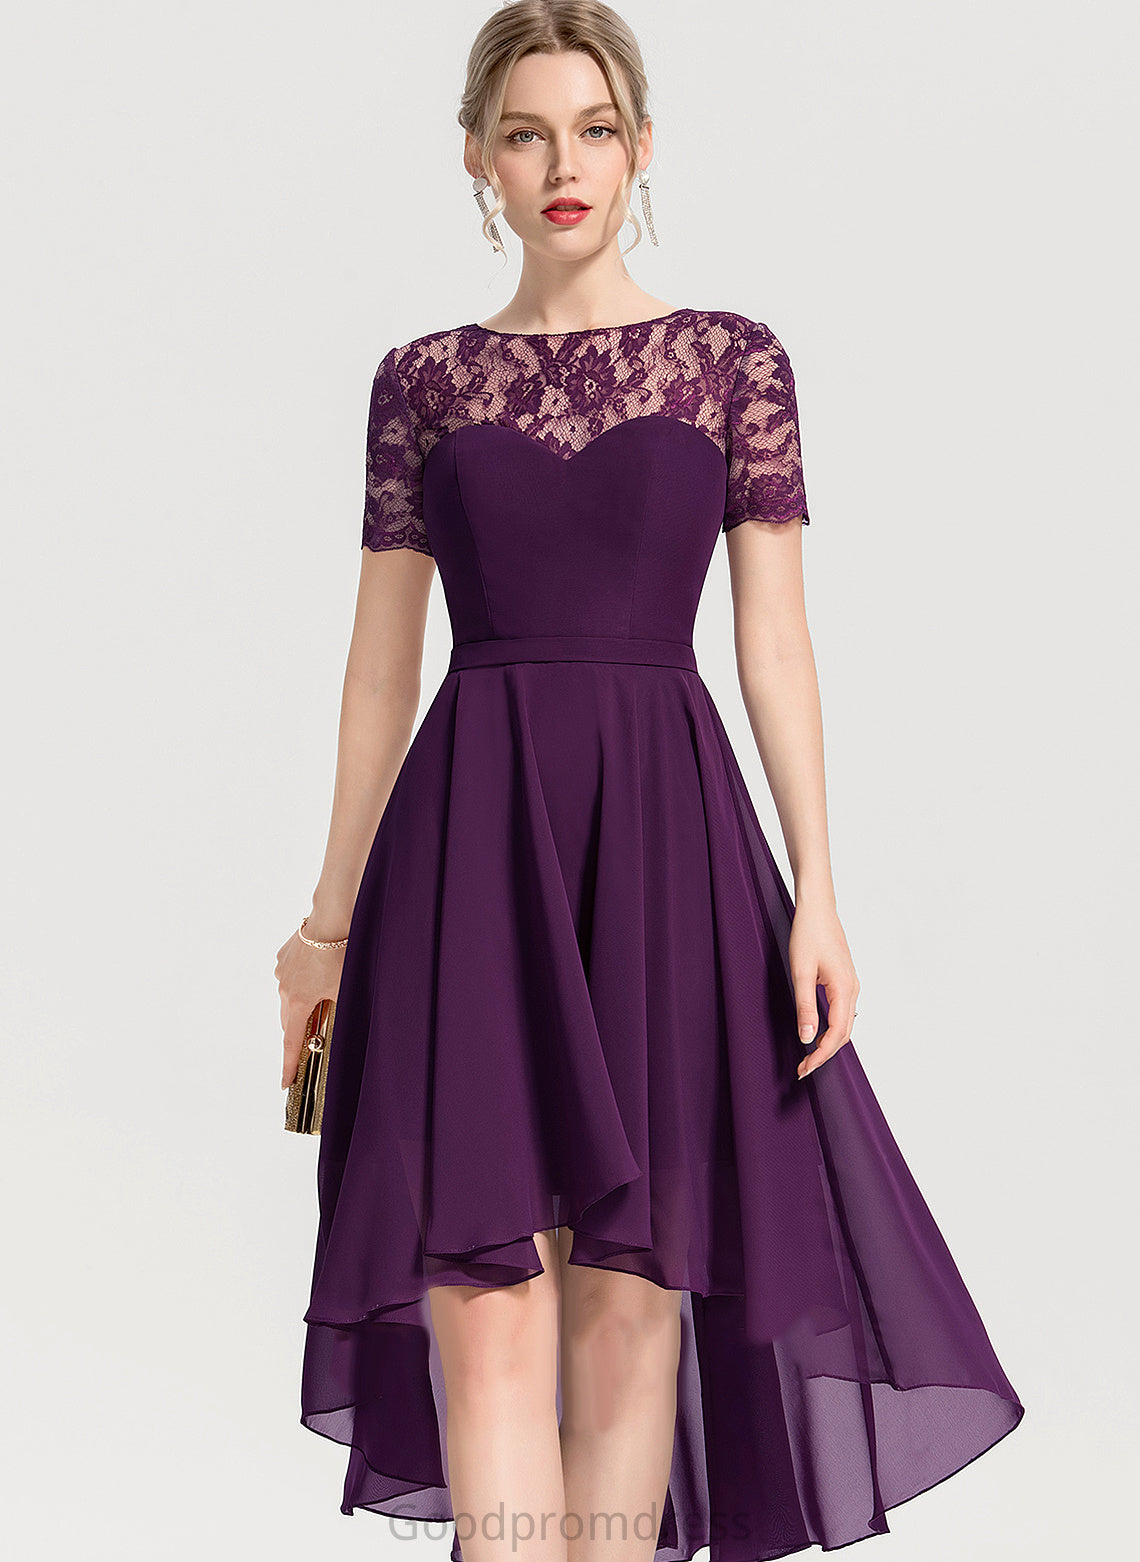 Scoop Asymmetrical With Lace Winnie Dress Chiffon Neck A-Line Homecoming Dresses Homecoming